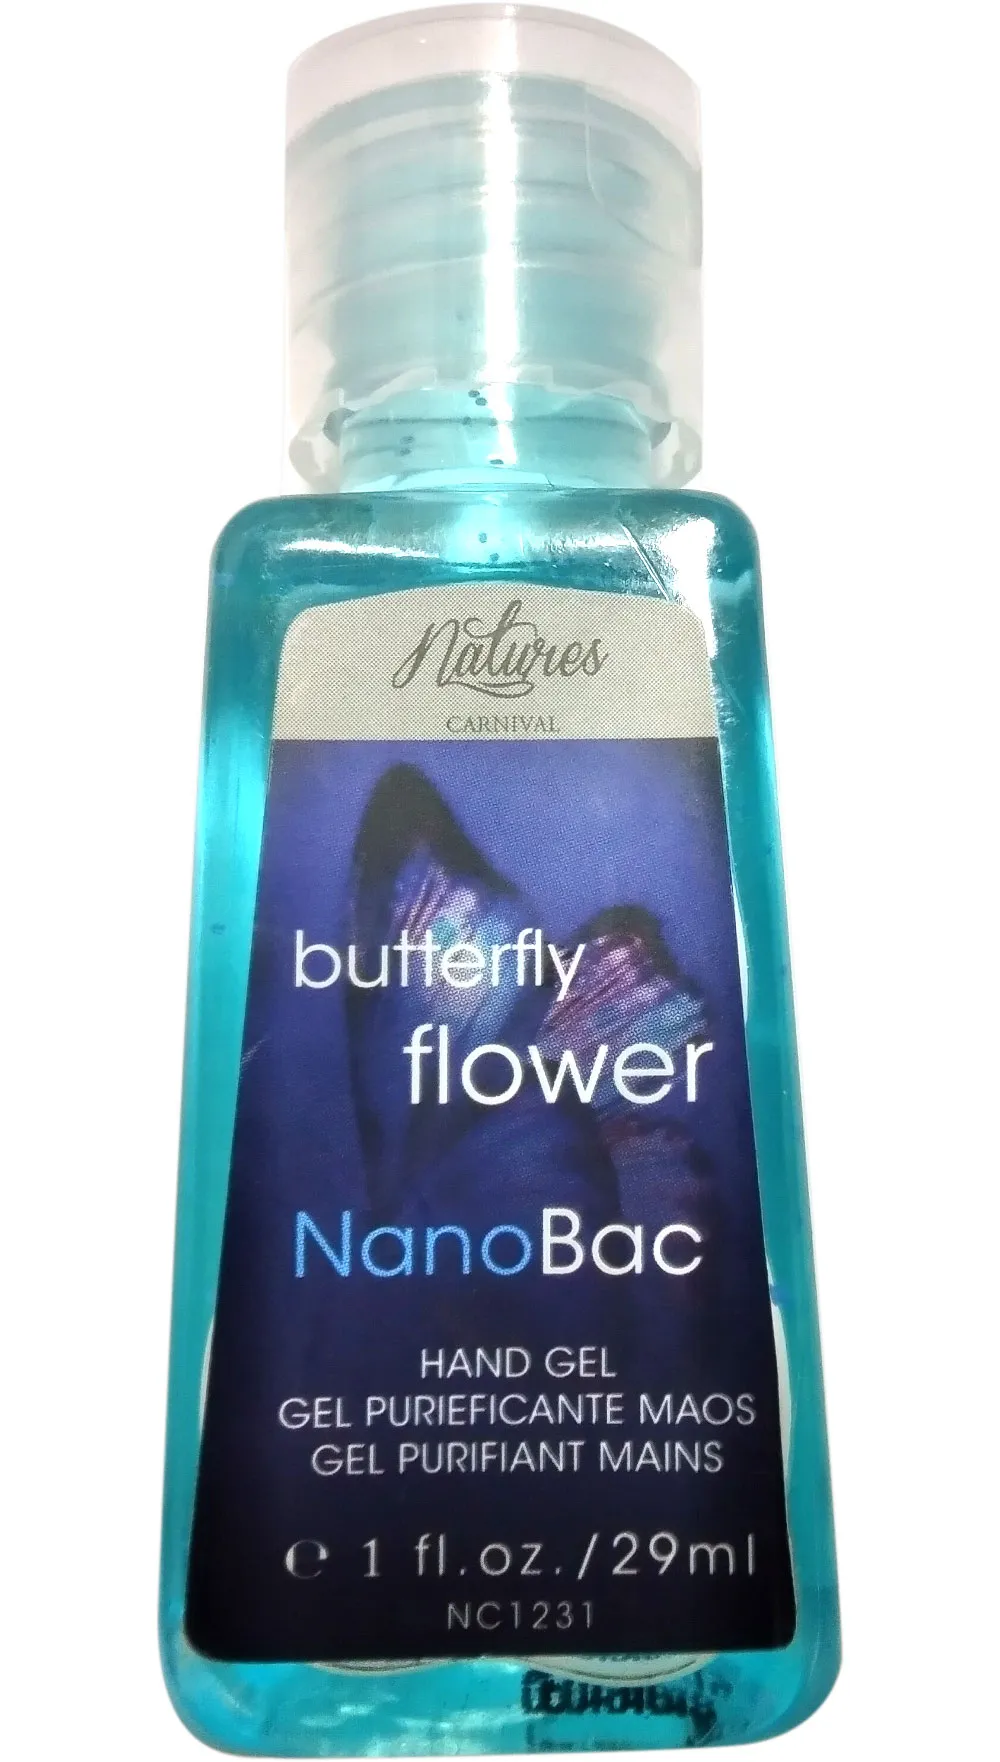 Natures Carnival Hand Gel Butterfly Flower 29ml